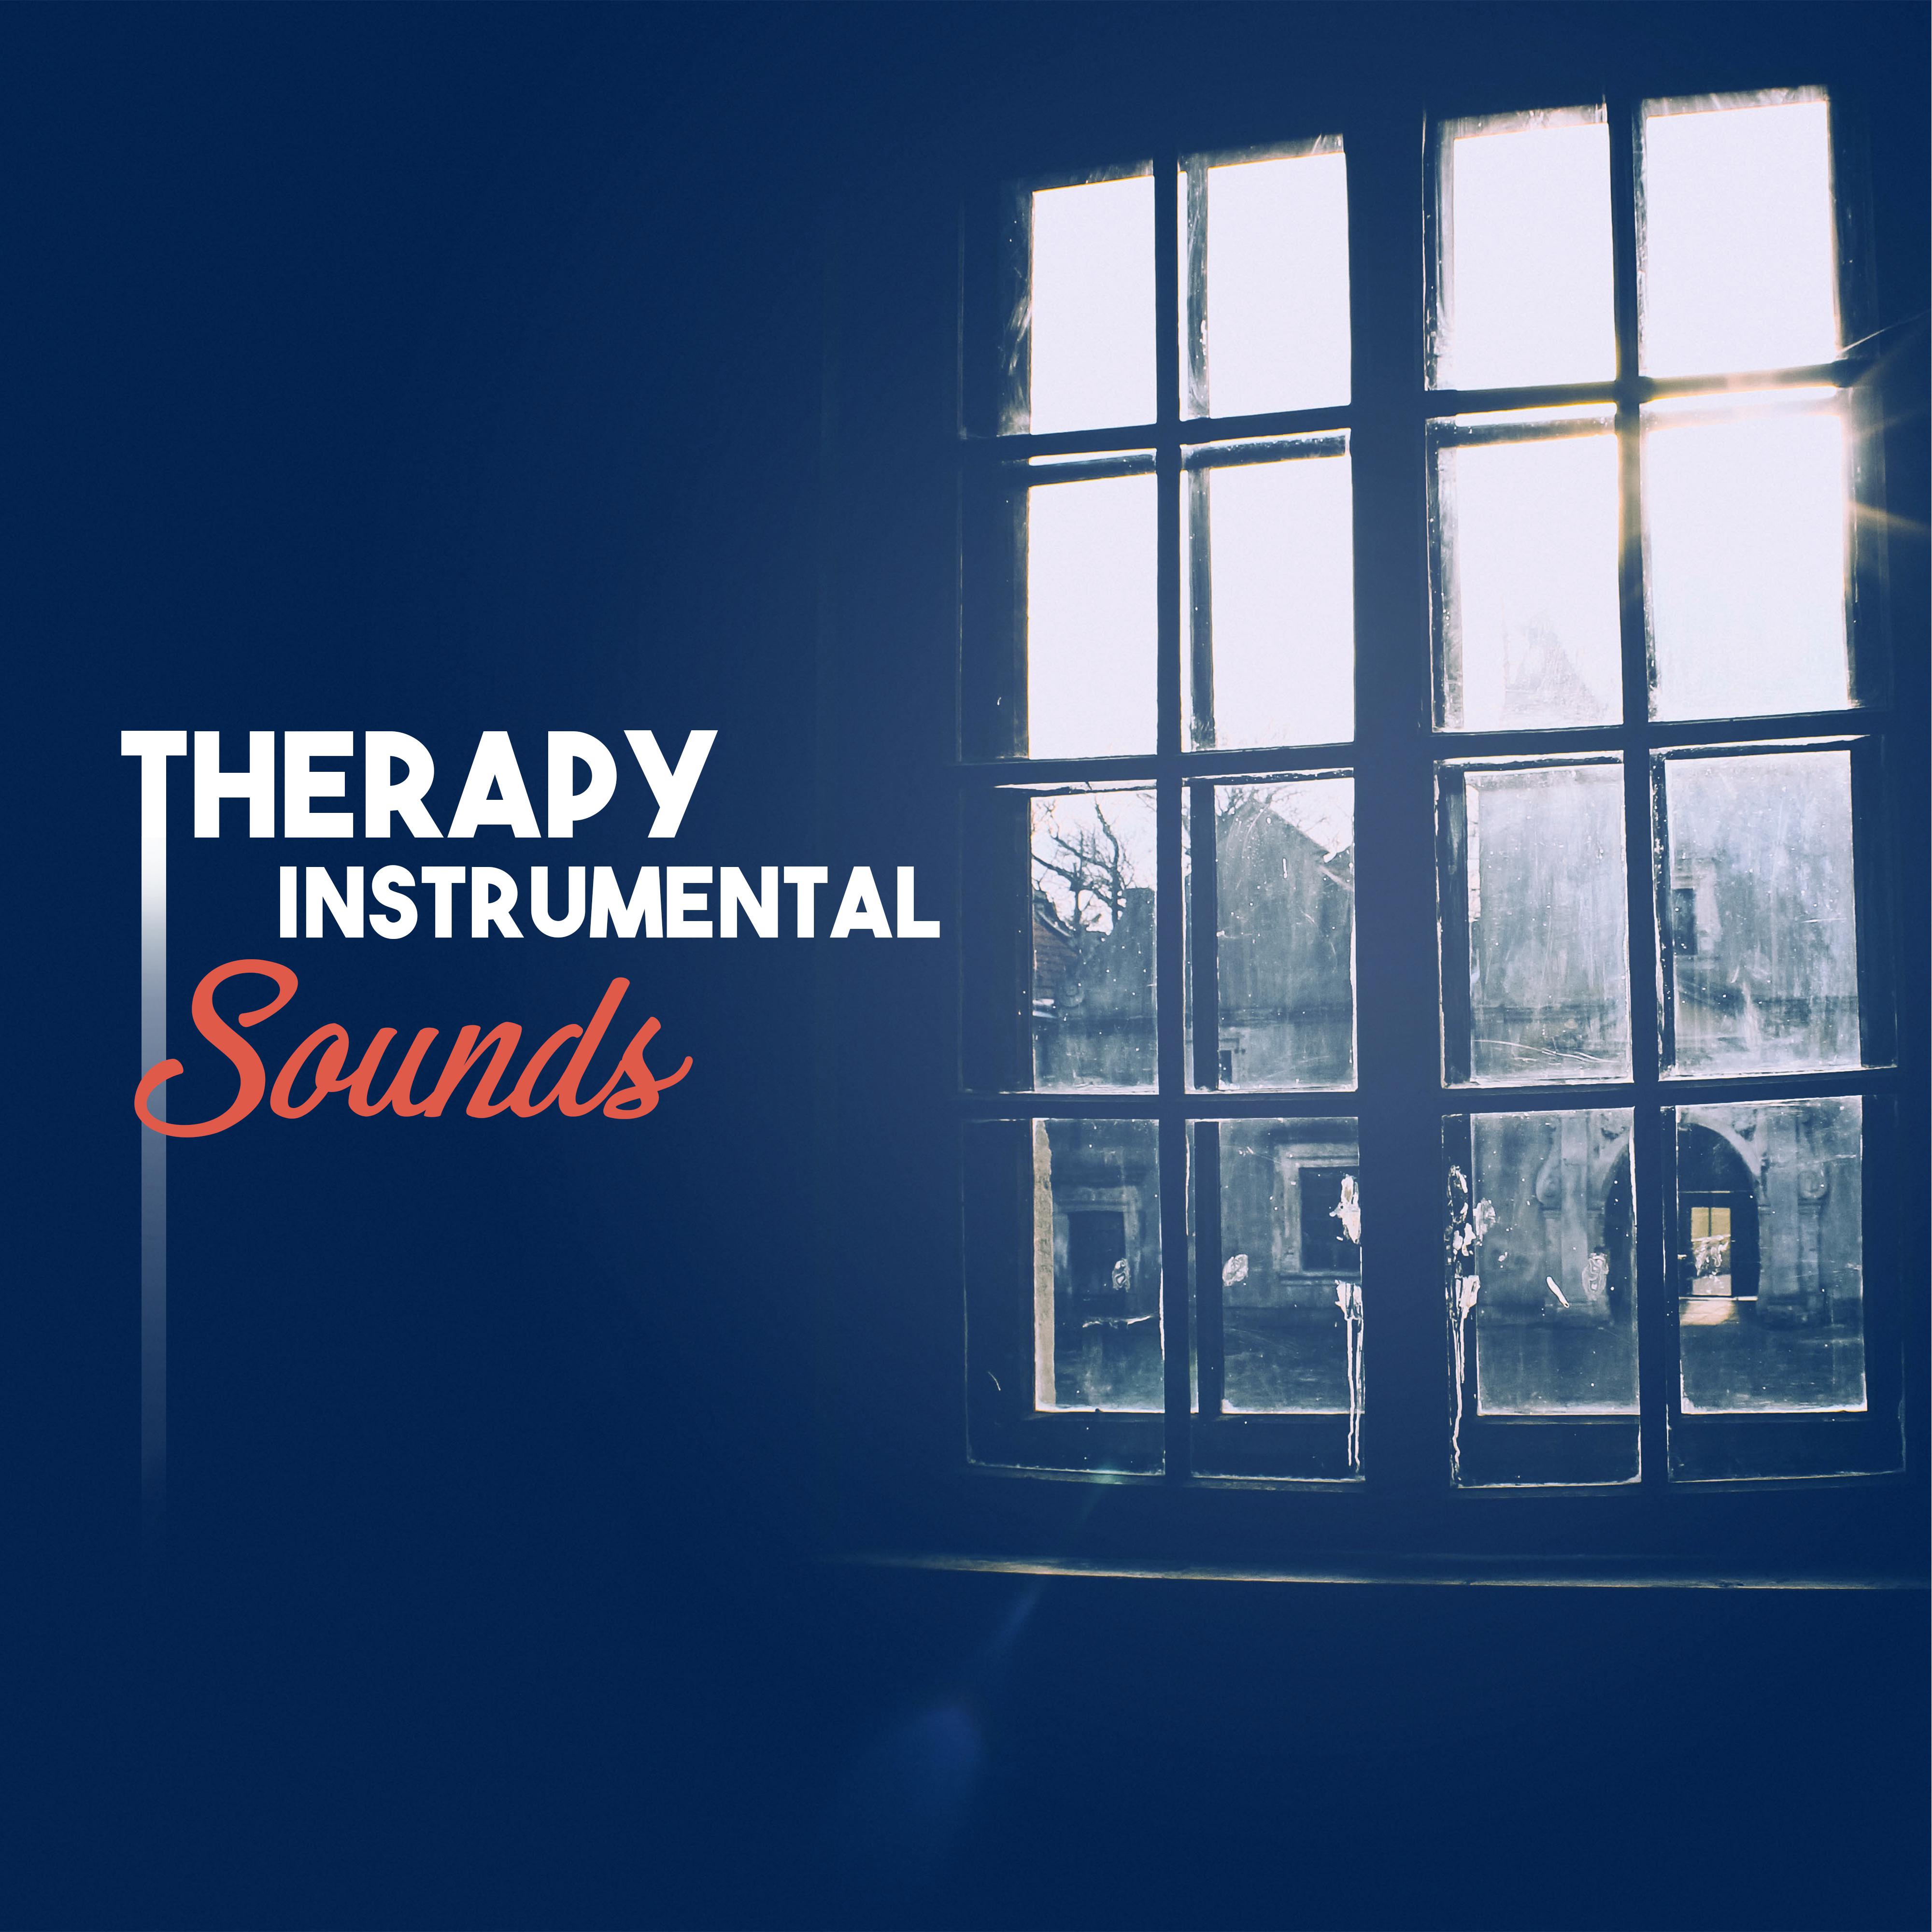 Therapy Instrumental Sounds  Smooth Jazz for Relaxation, Calming Music, Best Chillout, Jazz Music Ambient, Soothing Piano, Guitar